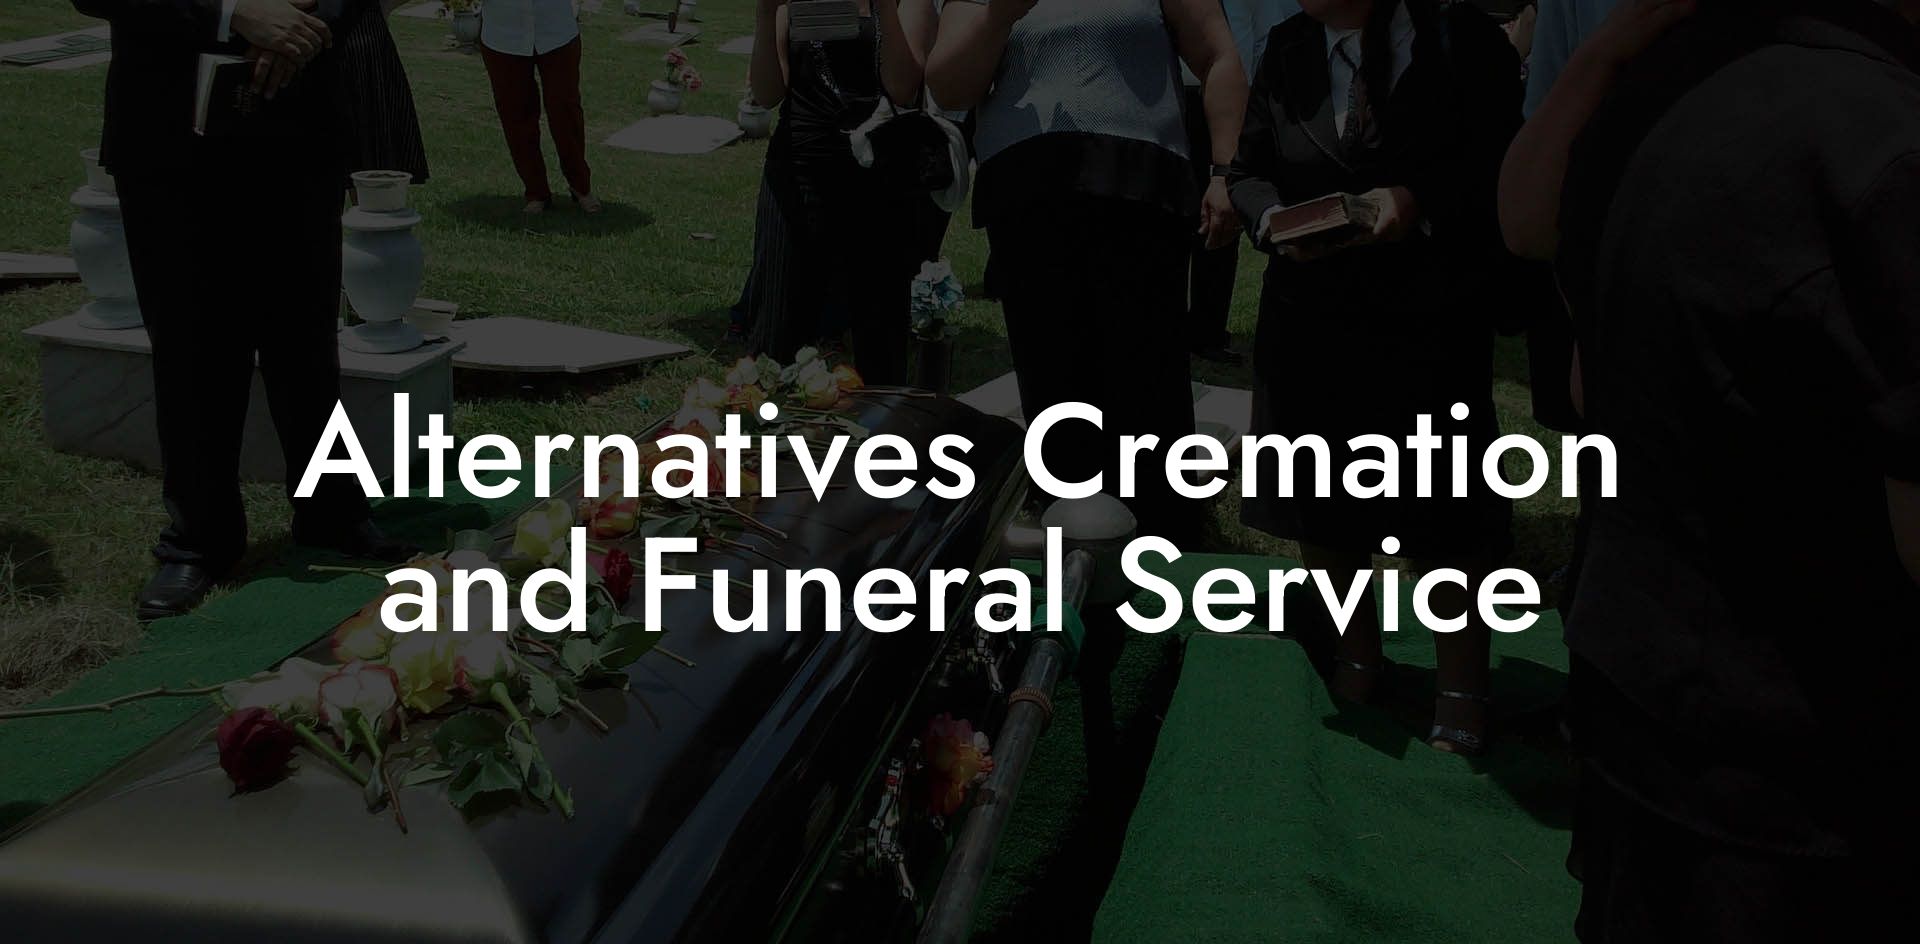 Alternatives Cremation and Funeral Service